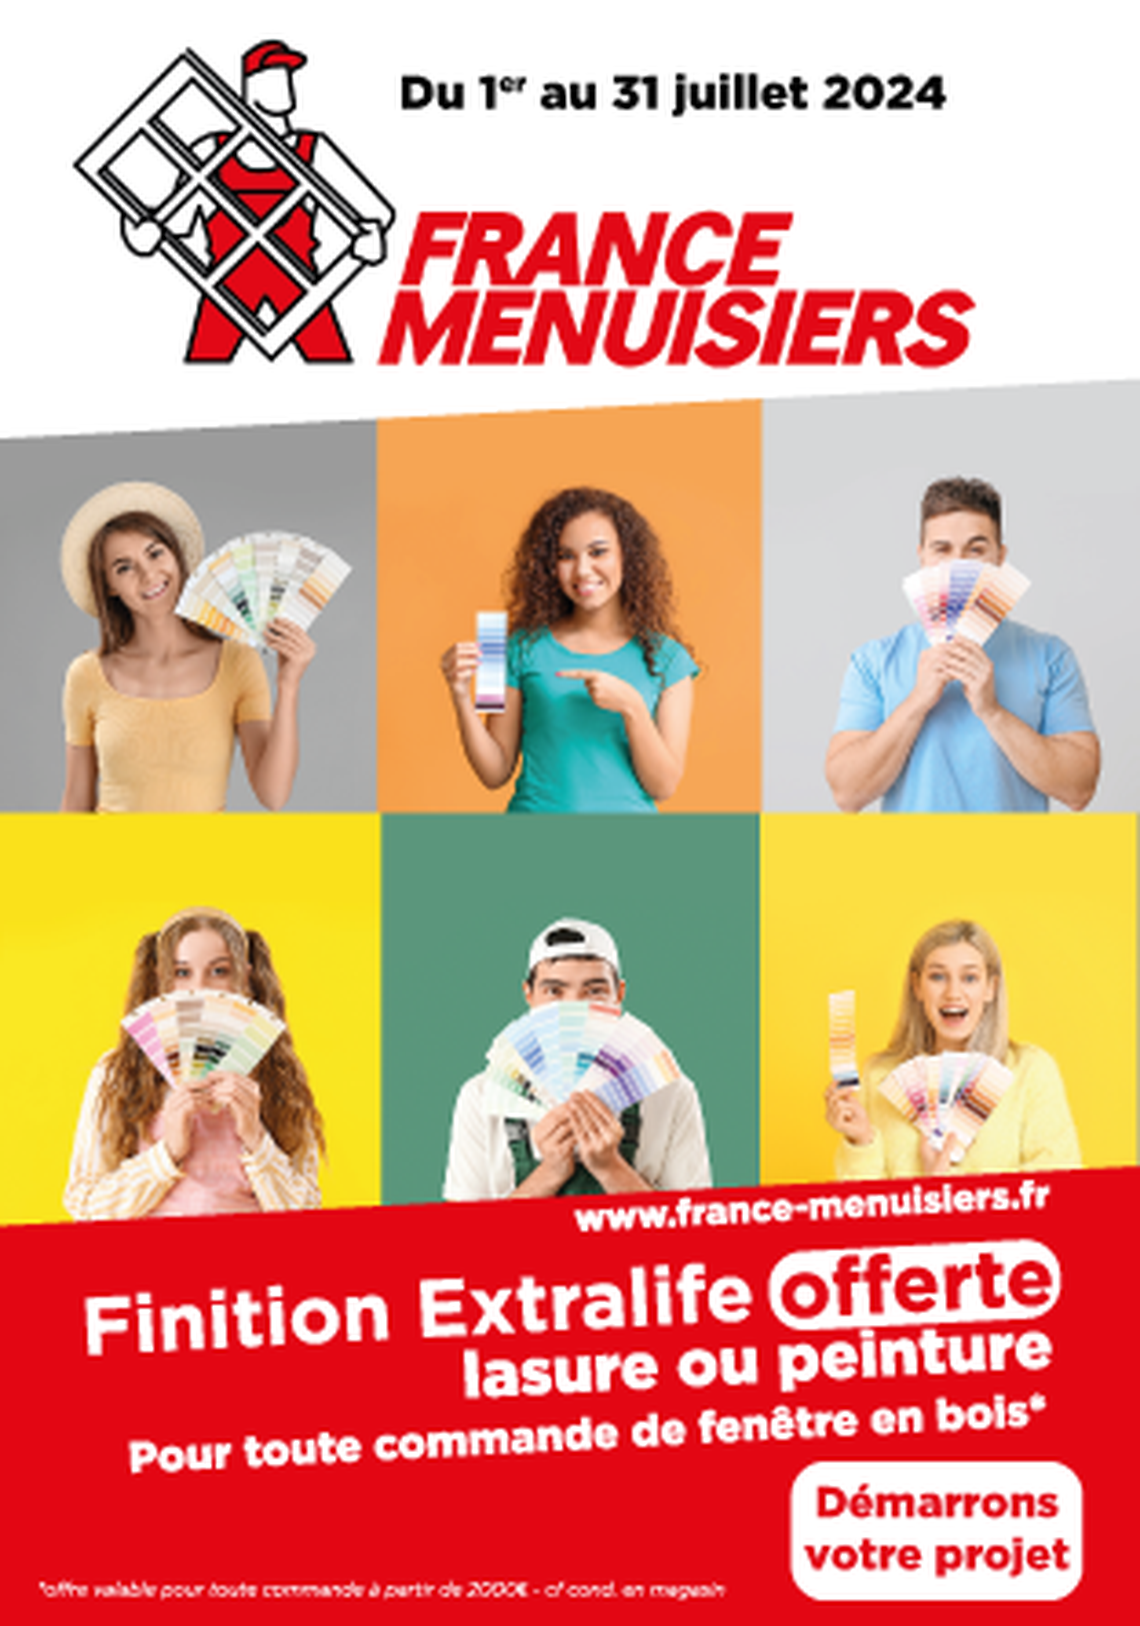 FRANCE MENUISIERS nantes - Finition Extralife Offerte